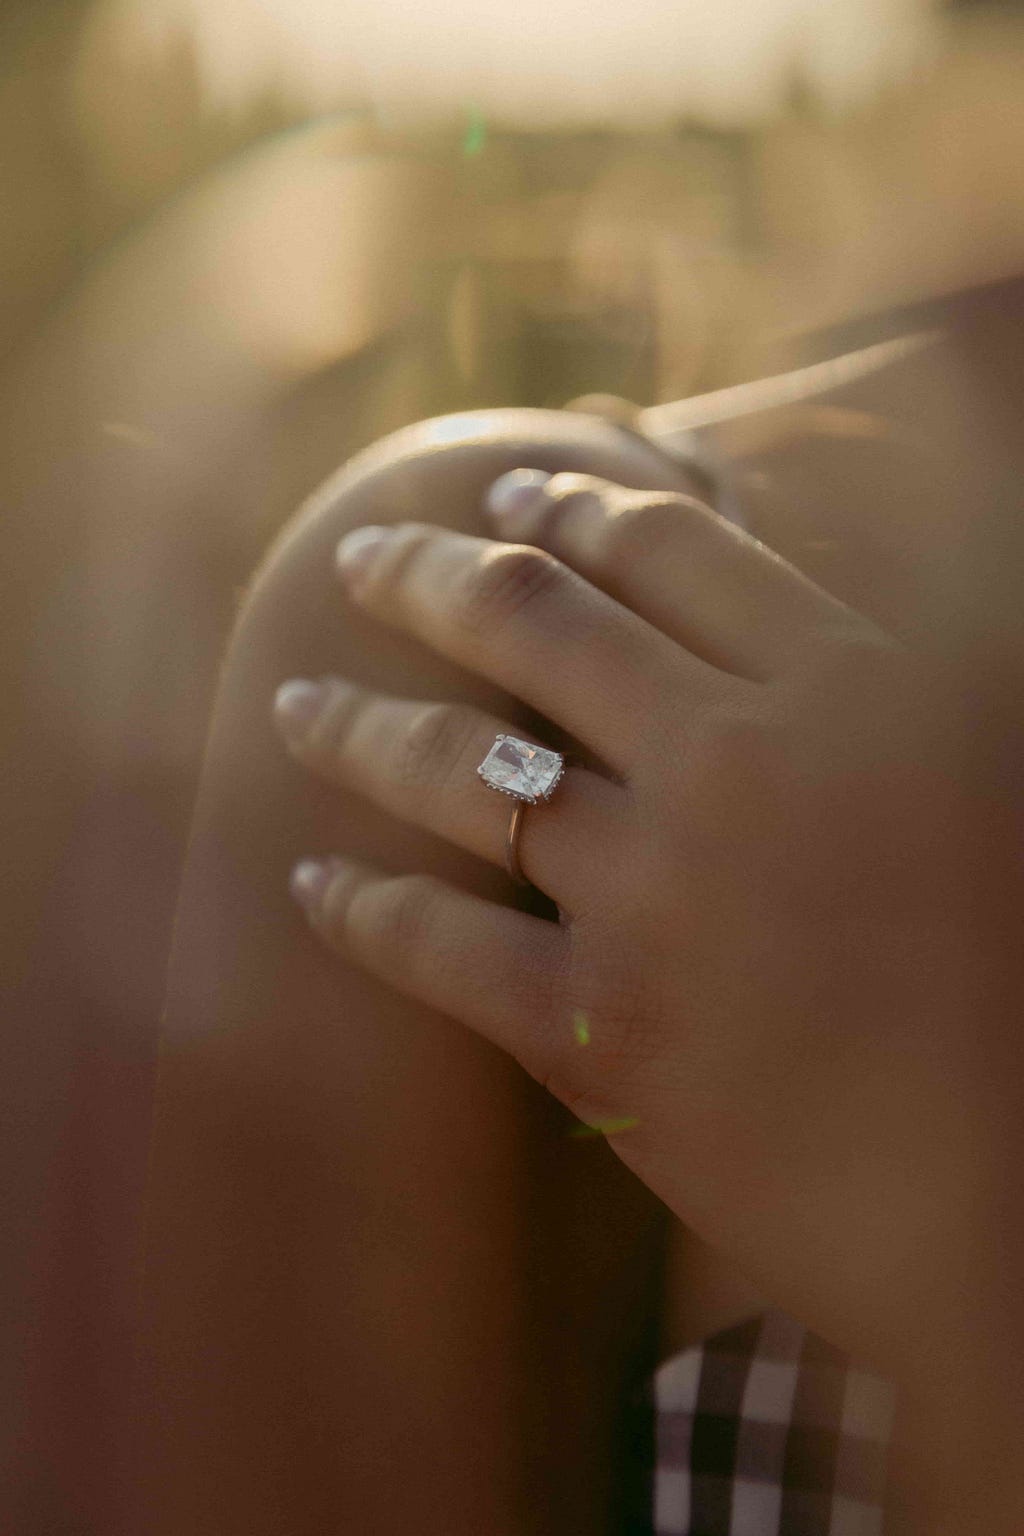 A diamond engagement ring on a woman’s hand which is resting on her shoulder.